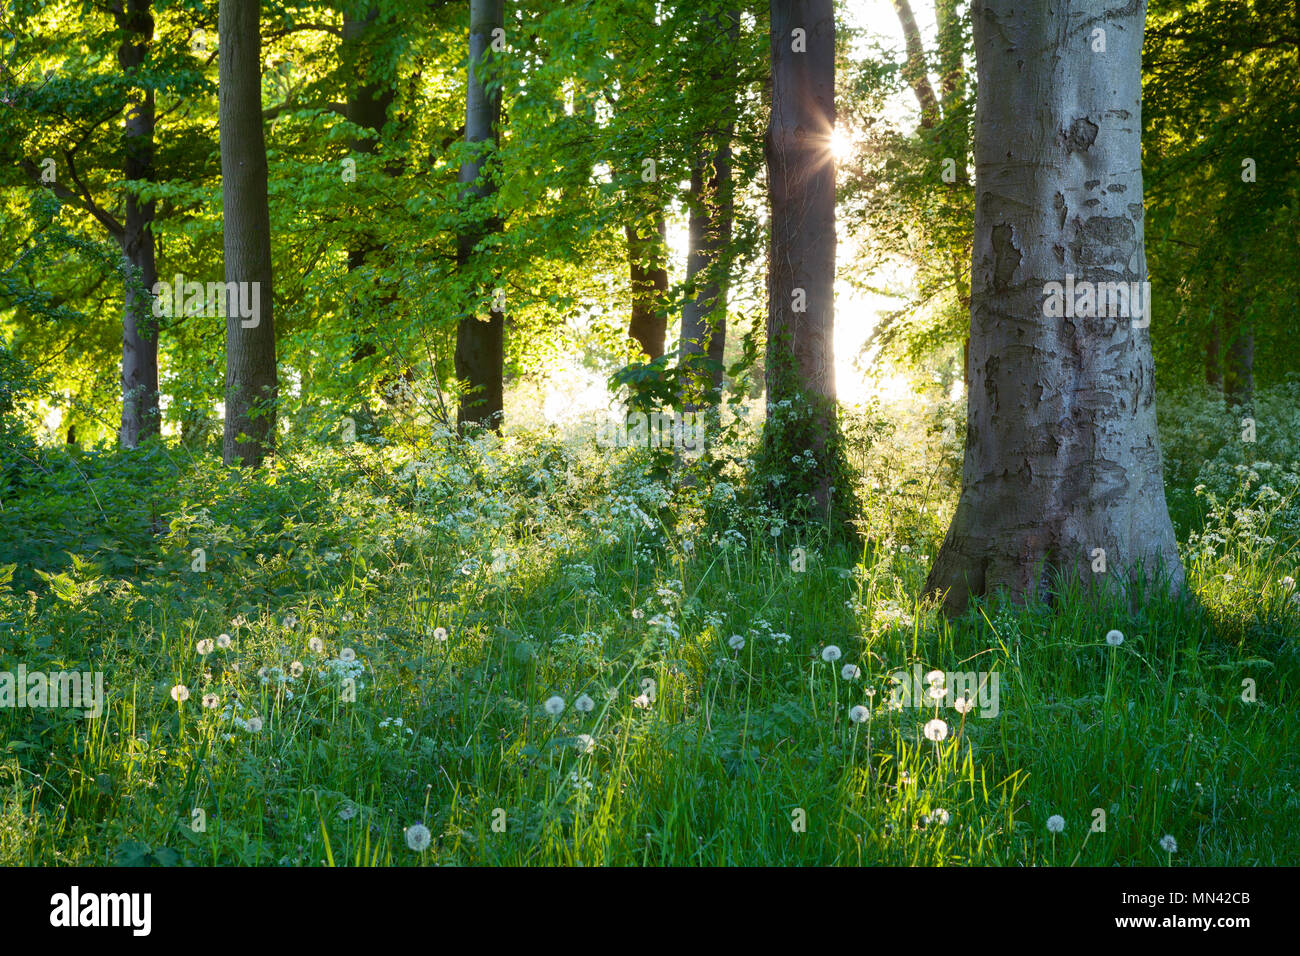 Barton-upon-Humber, North Lincolnshire, UK. 14th May, 2018. UK Weather: Early morning light on Cow Parsley and Beech Trees in Baysgarth Park in Spring. Barton-upon-Humber, North Lincolnshire, UK. 14th May 2018. Credit: LEE BEEL/Alamy Live News Stock Photo